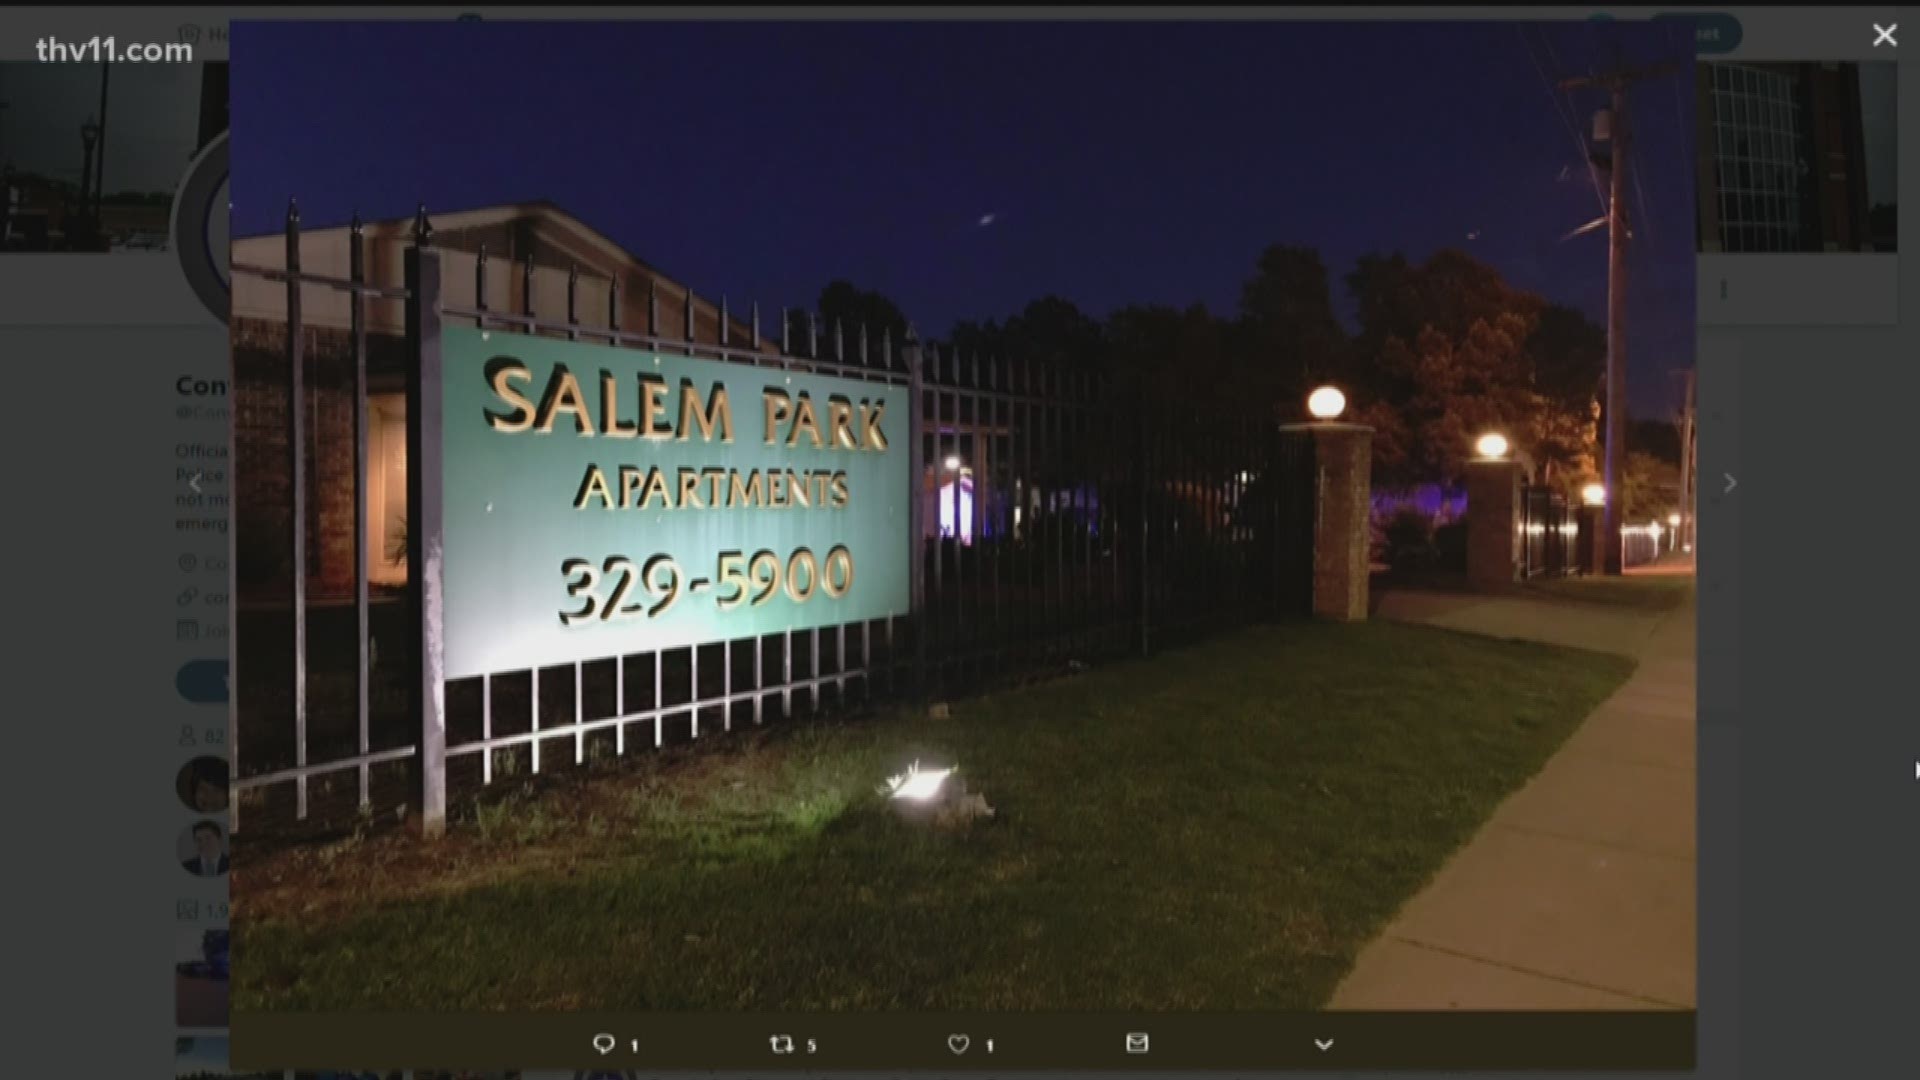 Police say a 4-year-old boy has drowned tonight at the swimming pool at Salem Park Apartments.